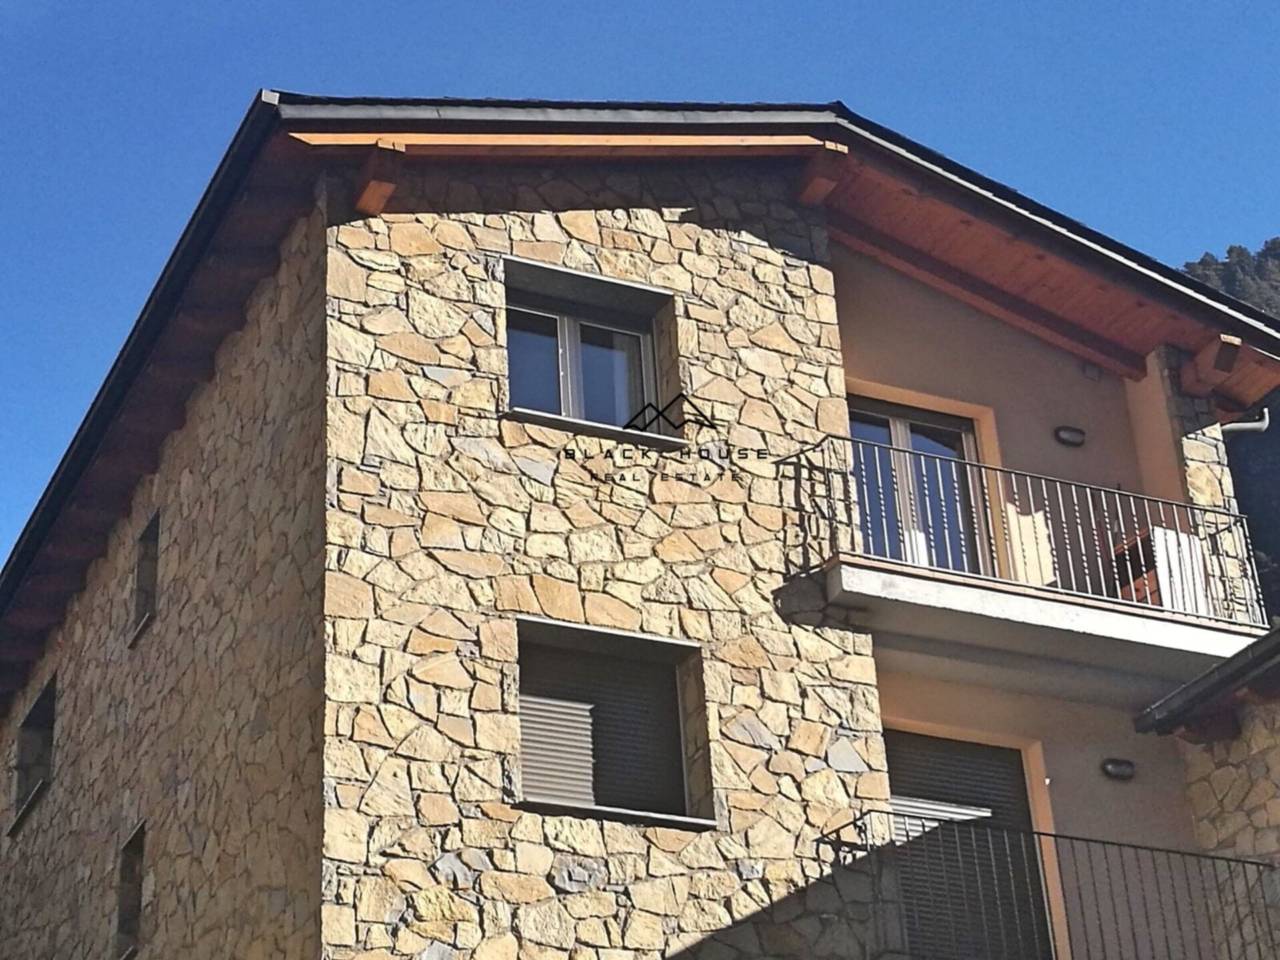 Nice penthouse for sale, located in Arinsal